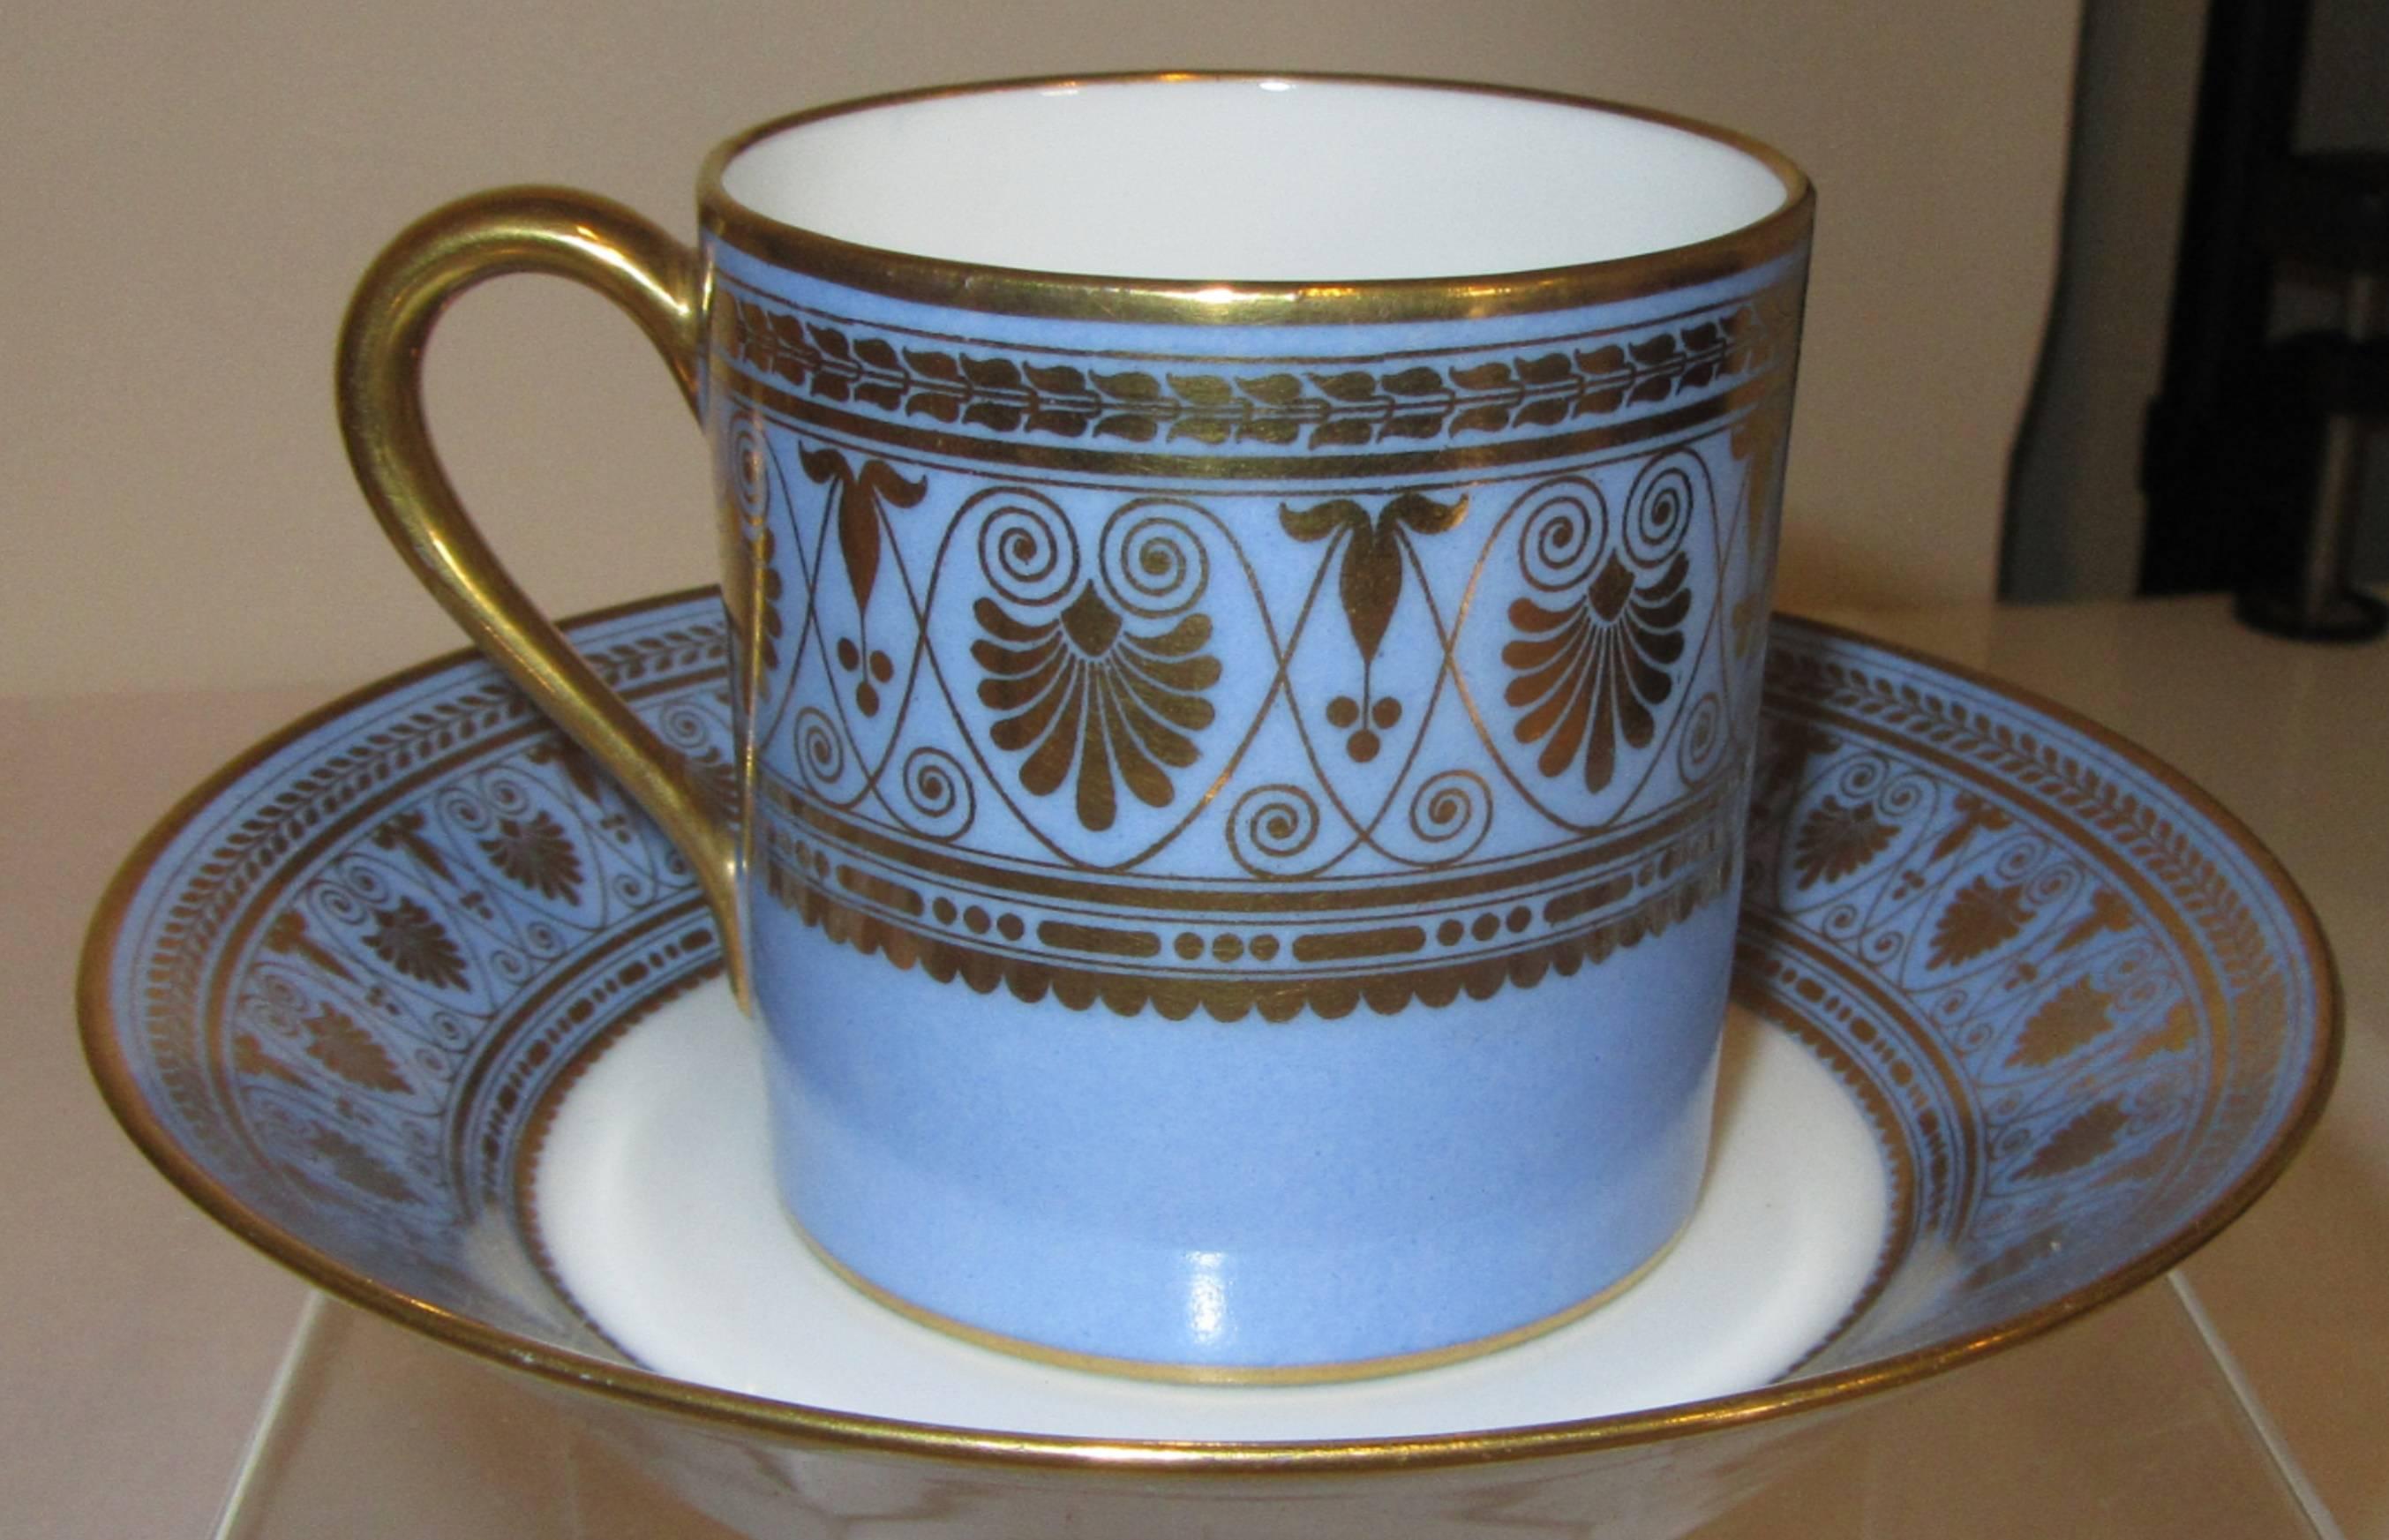 A coffee set in the pattern designed for Louis Phillipe for the castles of Saint-Cloud and Compiègne.
Decorated with rosettes and friezes of palmettes in gold on an agate blue background composed of two cup, two saucers, a sugar bowl, a teapot, and